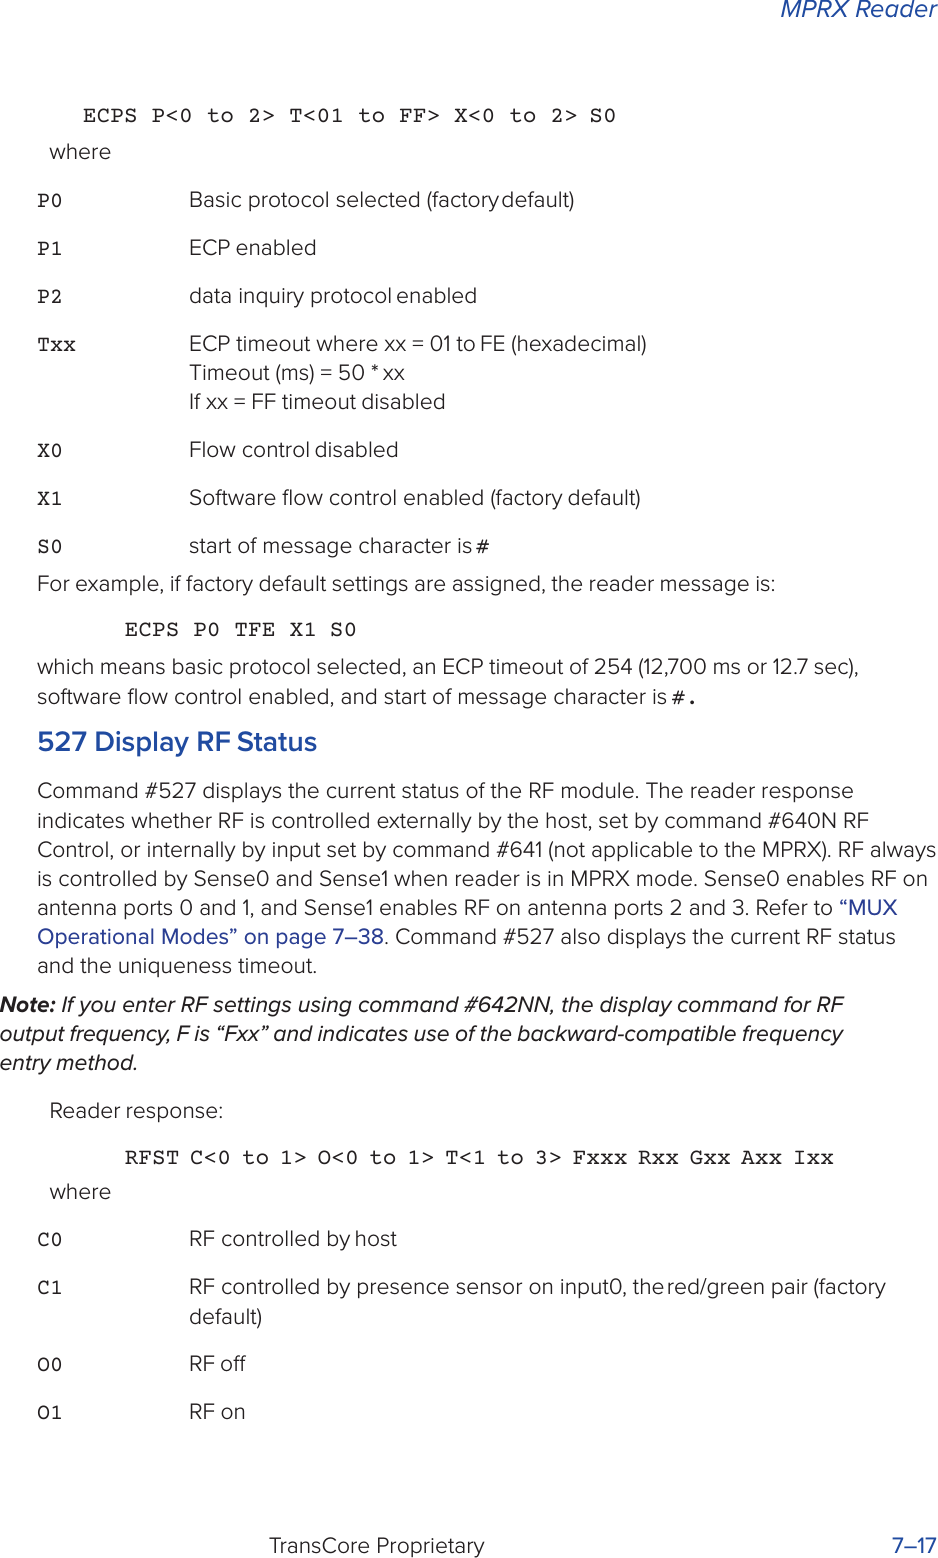 MPRX ReaderTransCore Proprietary 7–17ECPS P&lt;0 to 2&gt; T&lt;01 to FF&gt; X&lt;0 to 2&gt; S0whereP0 Basic protocol selected (factory default)P1 ECP enabledP2 data inquiry protocol enabledTxx ECP timeout where xx = 01 to FE (hexadecimal)  Timeout (ms) = 50 * xx If xx = FF timeout disabledX0 Flow control disabledX1 Software ﬂow control enabled (factory default)S0 start of message character is #For example, if factory default settings are assigned, the reader message is:ECPS P0 TFE X1 S0which means basic protocol selected, an ECP timeout of 254 (12,700 ms or 12.7 sec), software ﬂow control enabled, and start of message character is #.527 Display RF StatusCommand #527 displays the current status of the RF module. The reader response indicates whether RF is controlled externally by the host, set by command #640N RF Control, or internally by input set by command #641 (not applicable to the MPRX). RF always is controlled by Sense0 and Sense1 when reader is in MPRX mode. Sense0 enables RF on antenna ports 0 and 1, and Sense1 enables RF on antenna ports 2 and 3. Refer to “MUX Operational Modes” on page 7–38. Command #527 also displays the current RF status and the uniqueness timeout.Note: If you enter RF settings using command #642NN, the display command for RF output frequency, F is “Fxx” and indicates use of the backward-compatible frequency entry method.Reader response:RFST C&lt;0 to 1&gt; O&lt;0 to 1&gt; T&lt;1 to 3&gt; Fxxx Rxx Gxx Axx IxxwhereC0 RF controlled by hostC1 RF controlled by presence sensor on input0, the red/green pair (factory default)O0 RF oO1 RF on